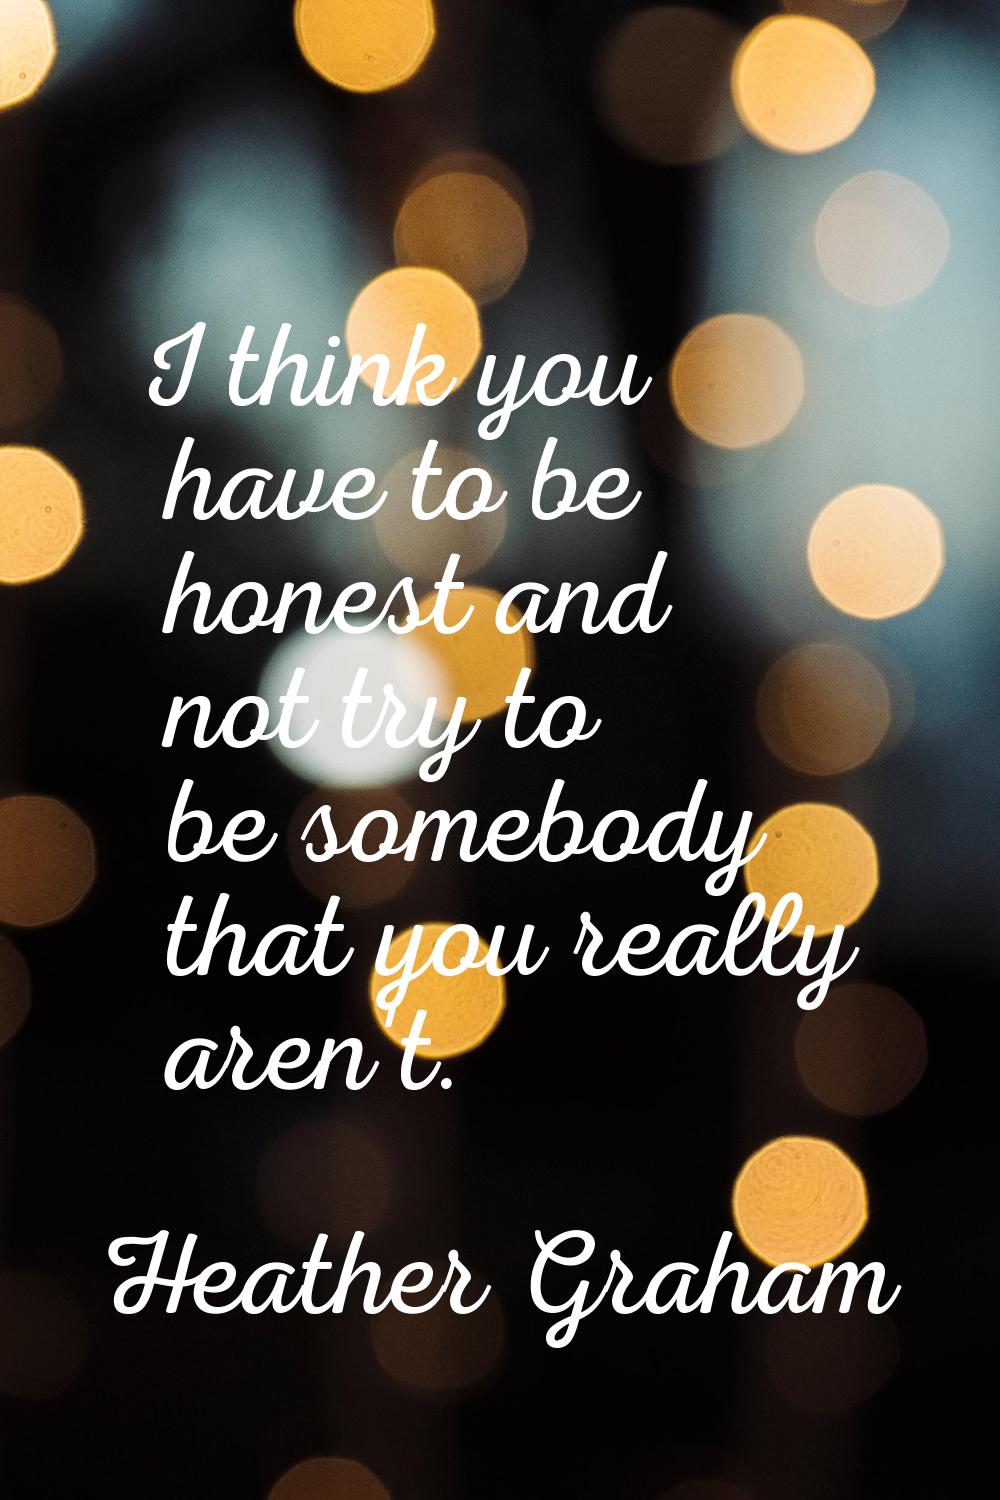 I think you have to be honest and not try to be somebody that you really aren't.